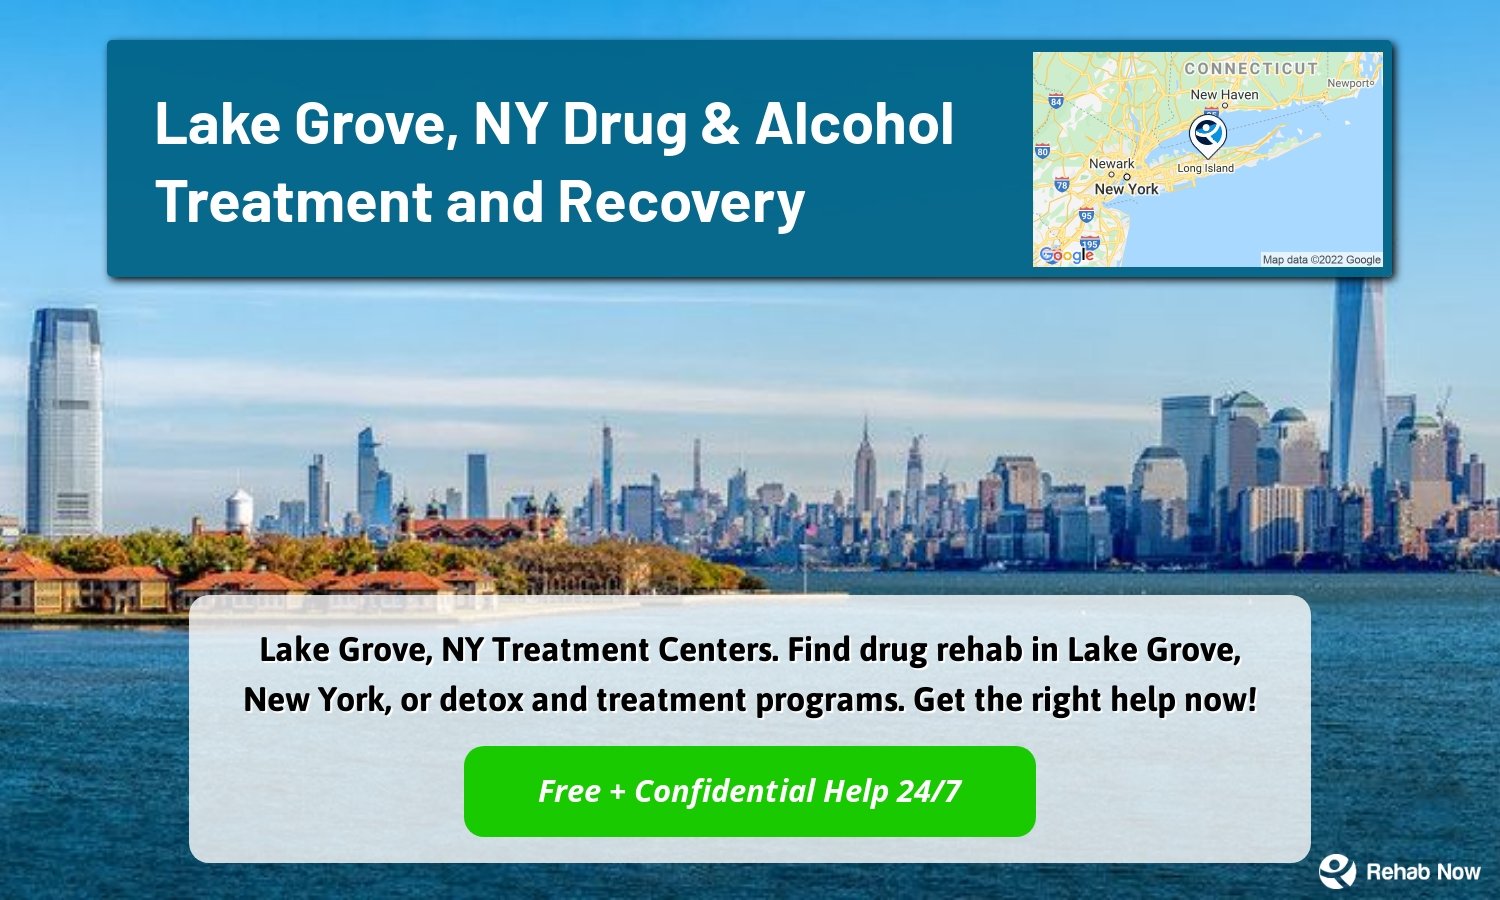 Lake Grove, NY Treatment Centers. Find drug rehab in Lake Grove, New York, or detox and treatment programs. Get the right help now!